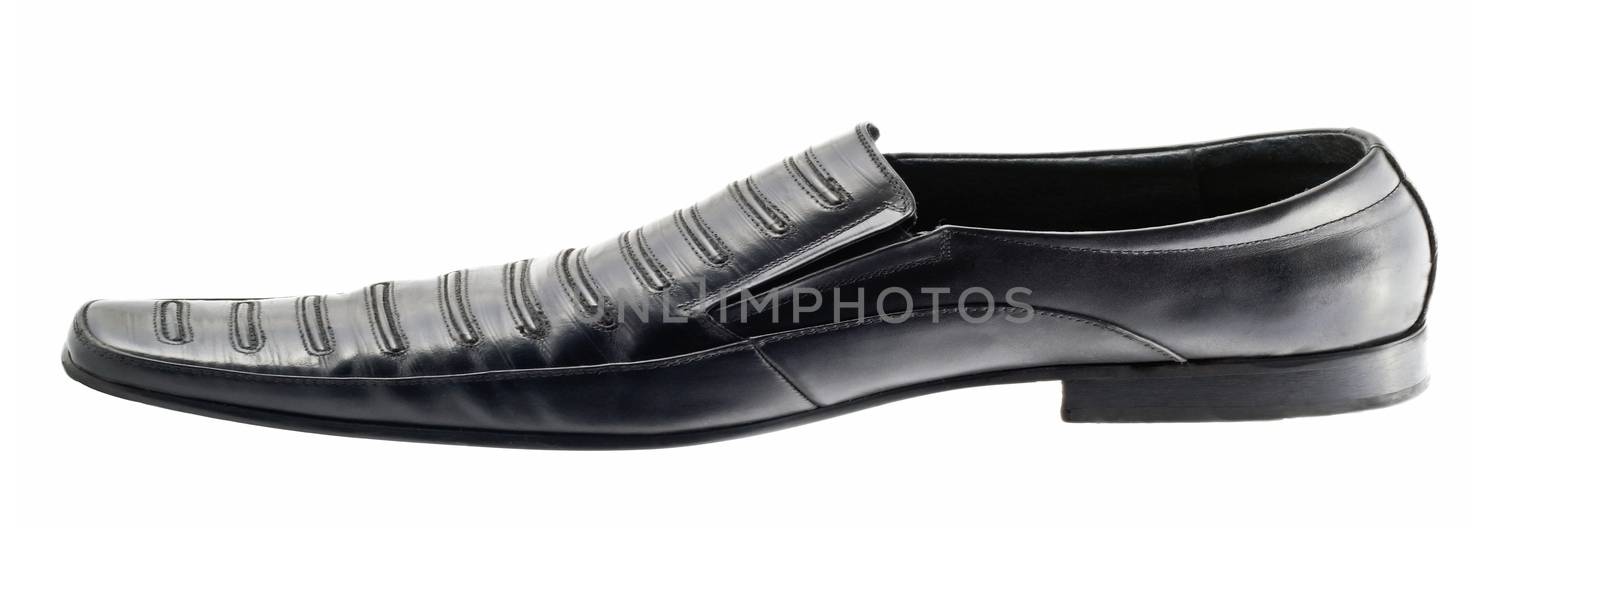 mens loafers on white background beauty Fashion